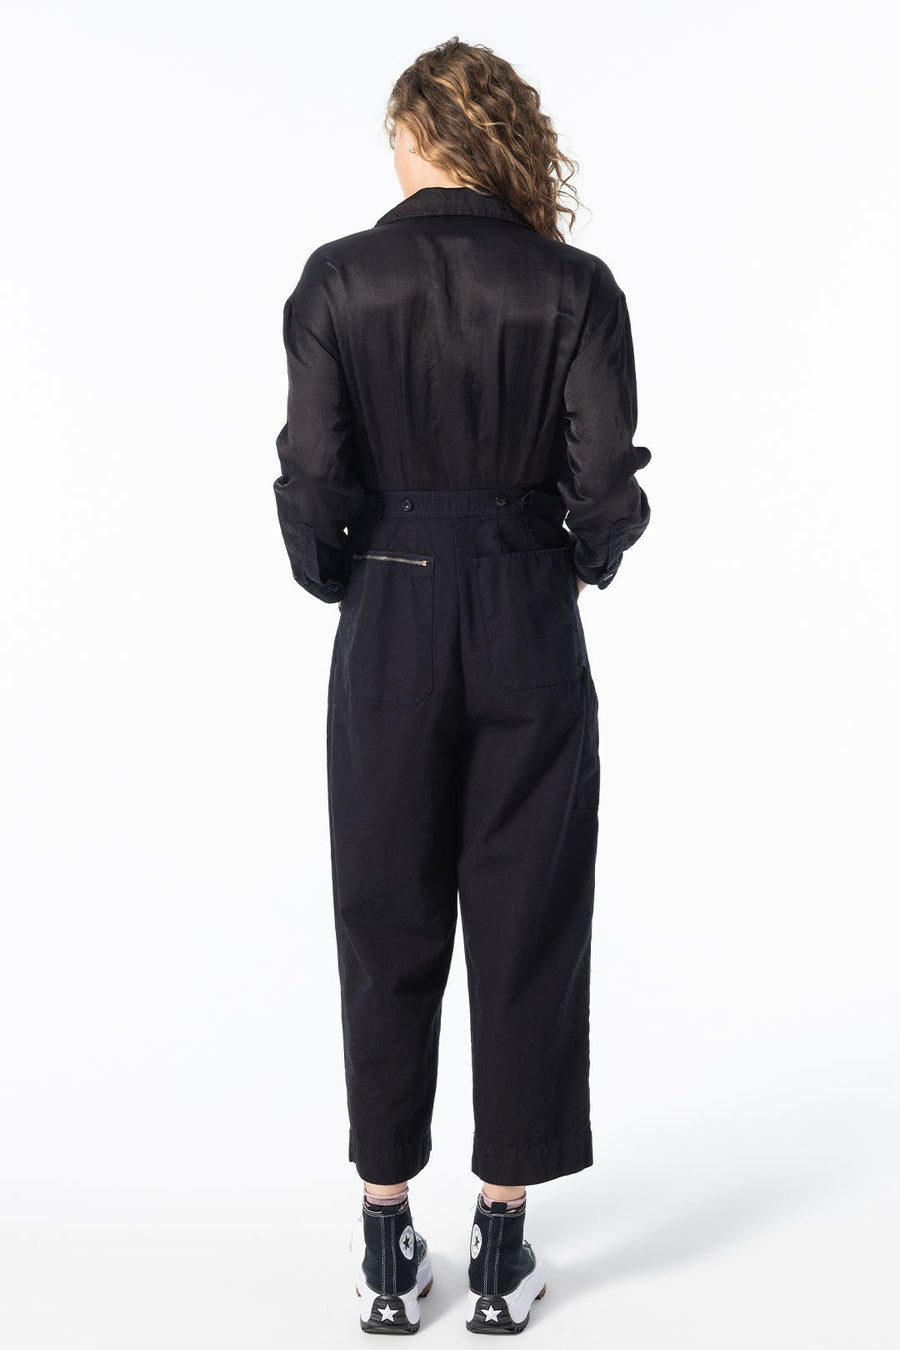 JEREMY COVERALL, BLACK - Burning Torch Online Boutique